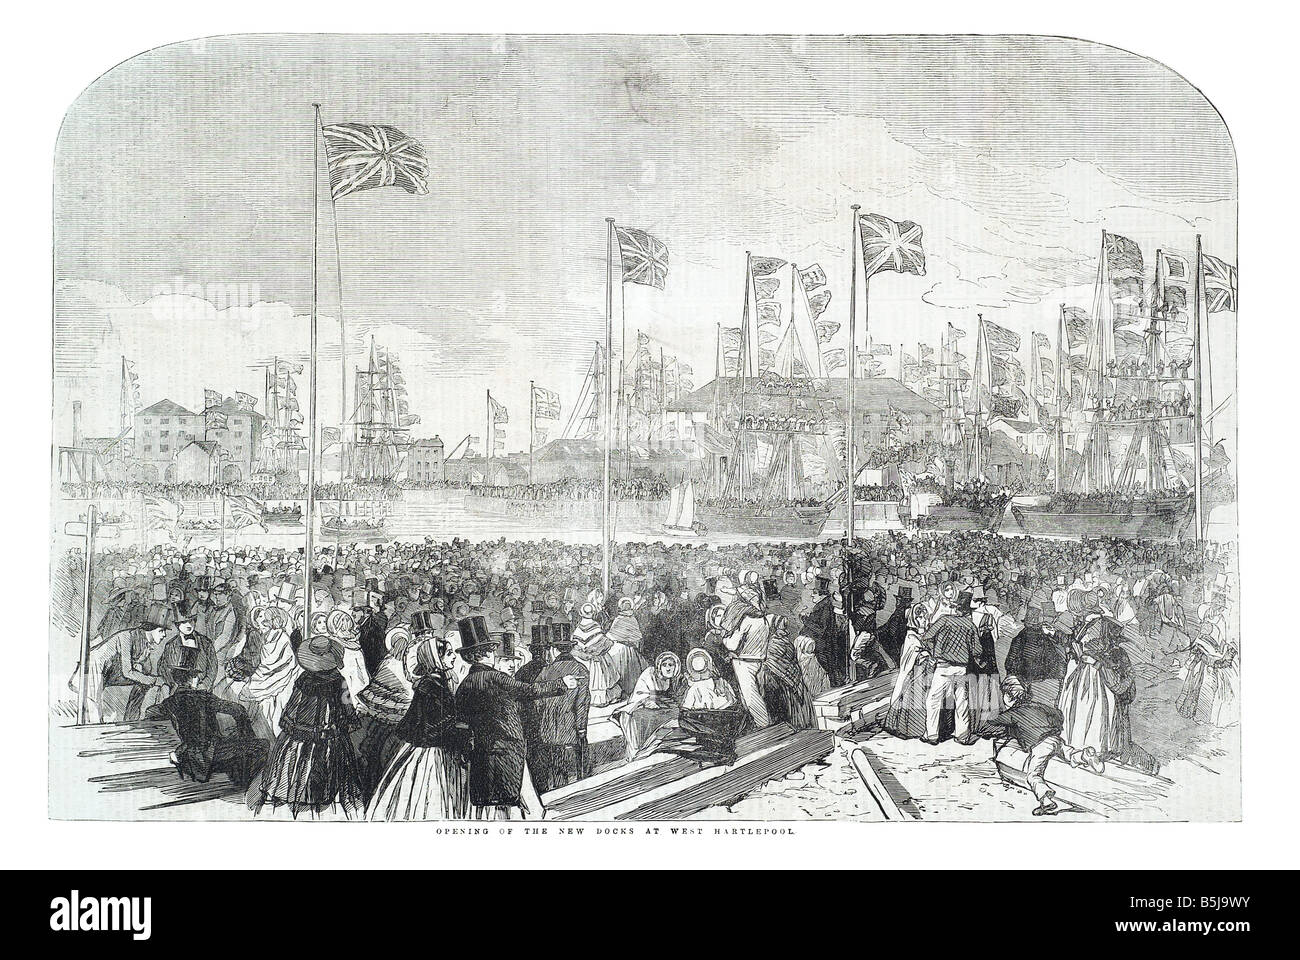 Opening of the new docks at west hartlepool June 14 1856 The Illustrated London News Page 652 Stock Photo